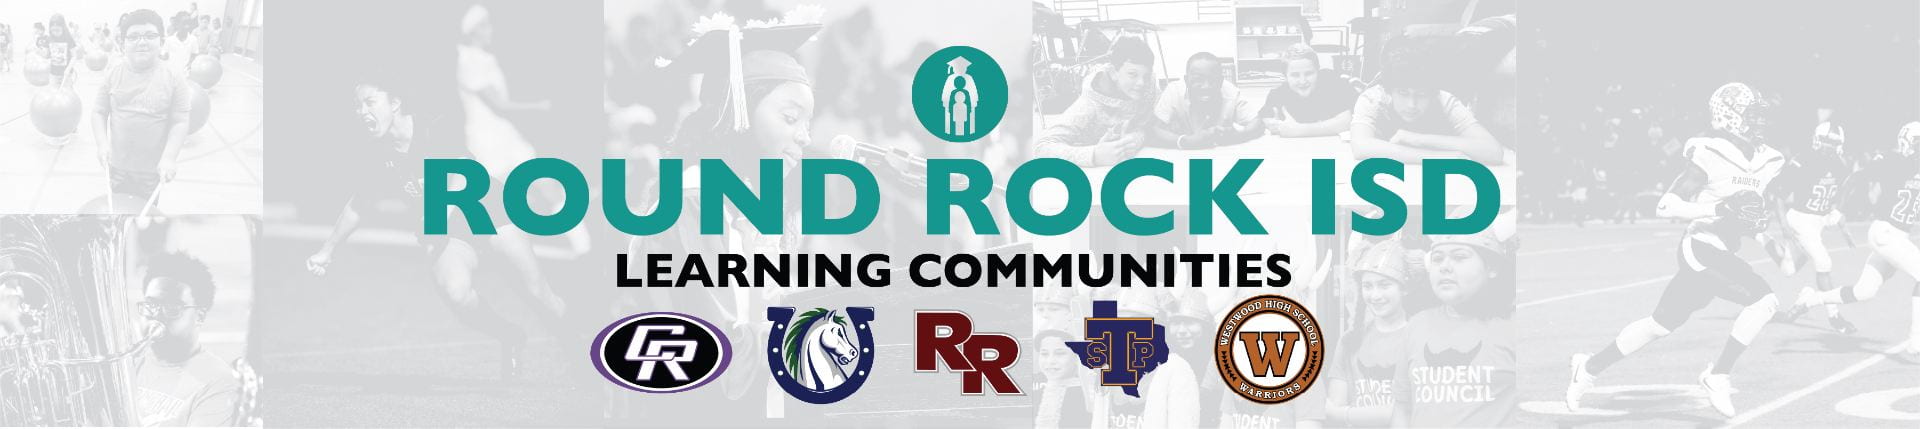 Round Rock ISD Learning Communities